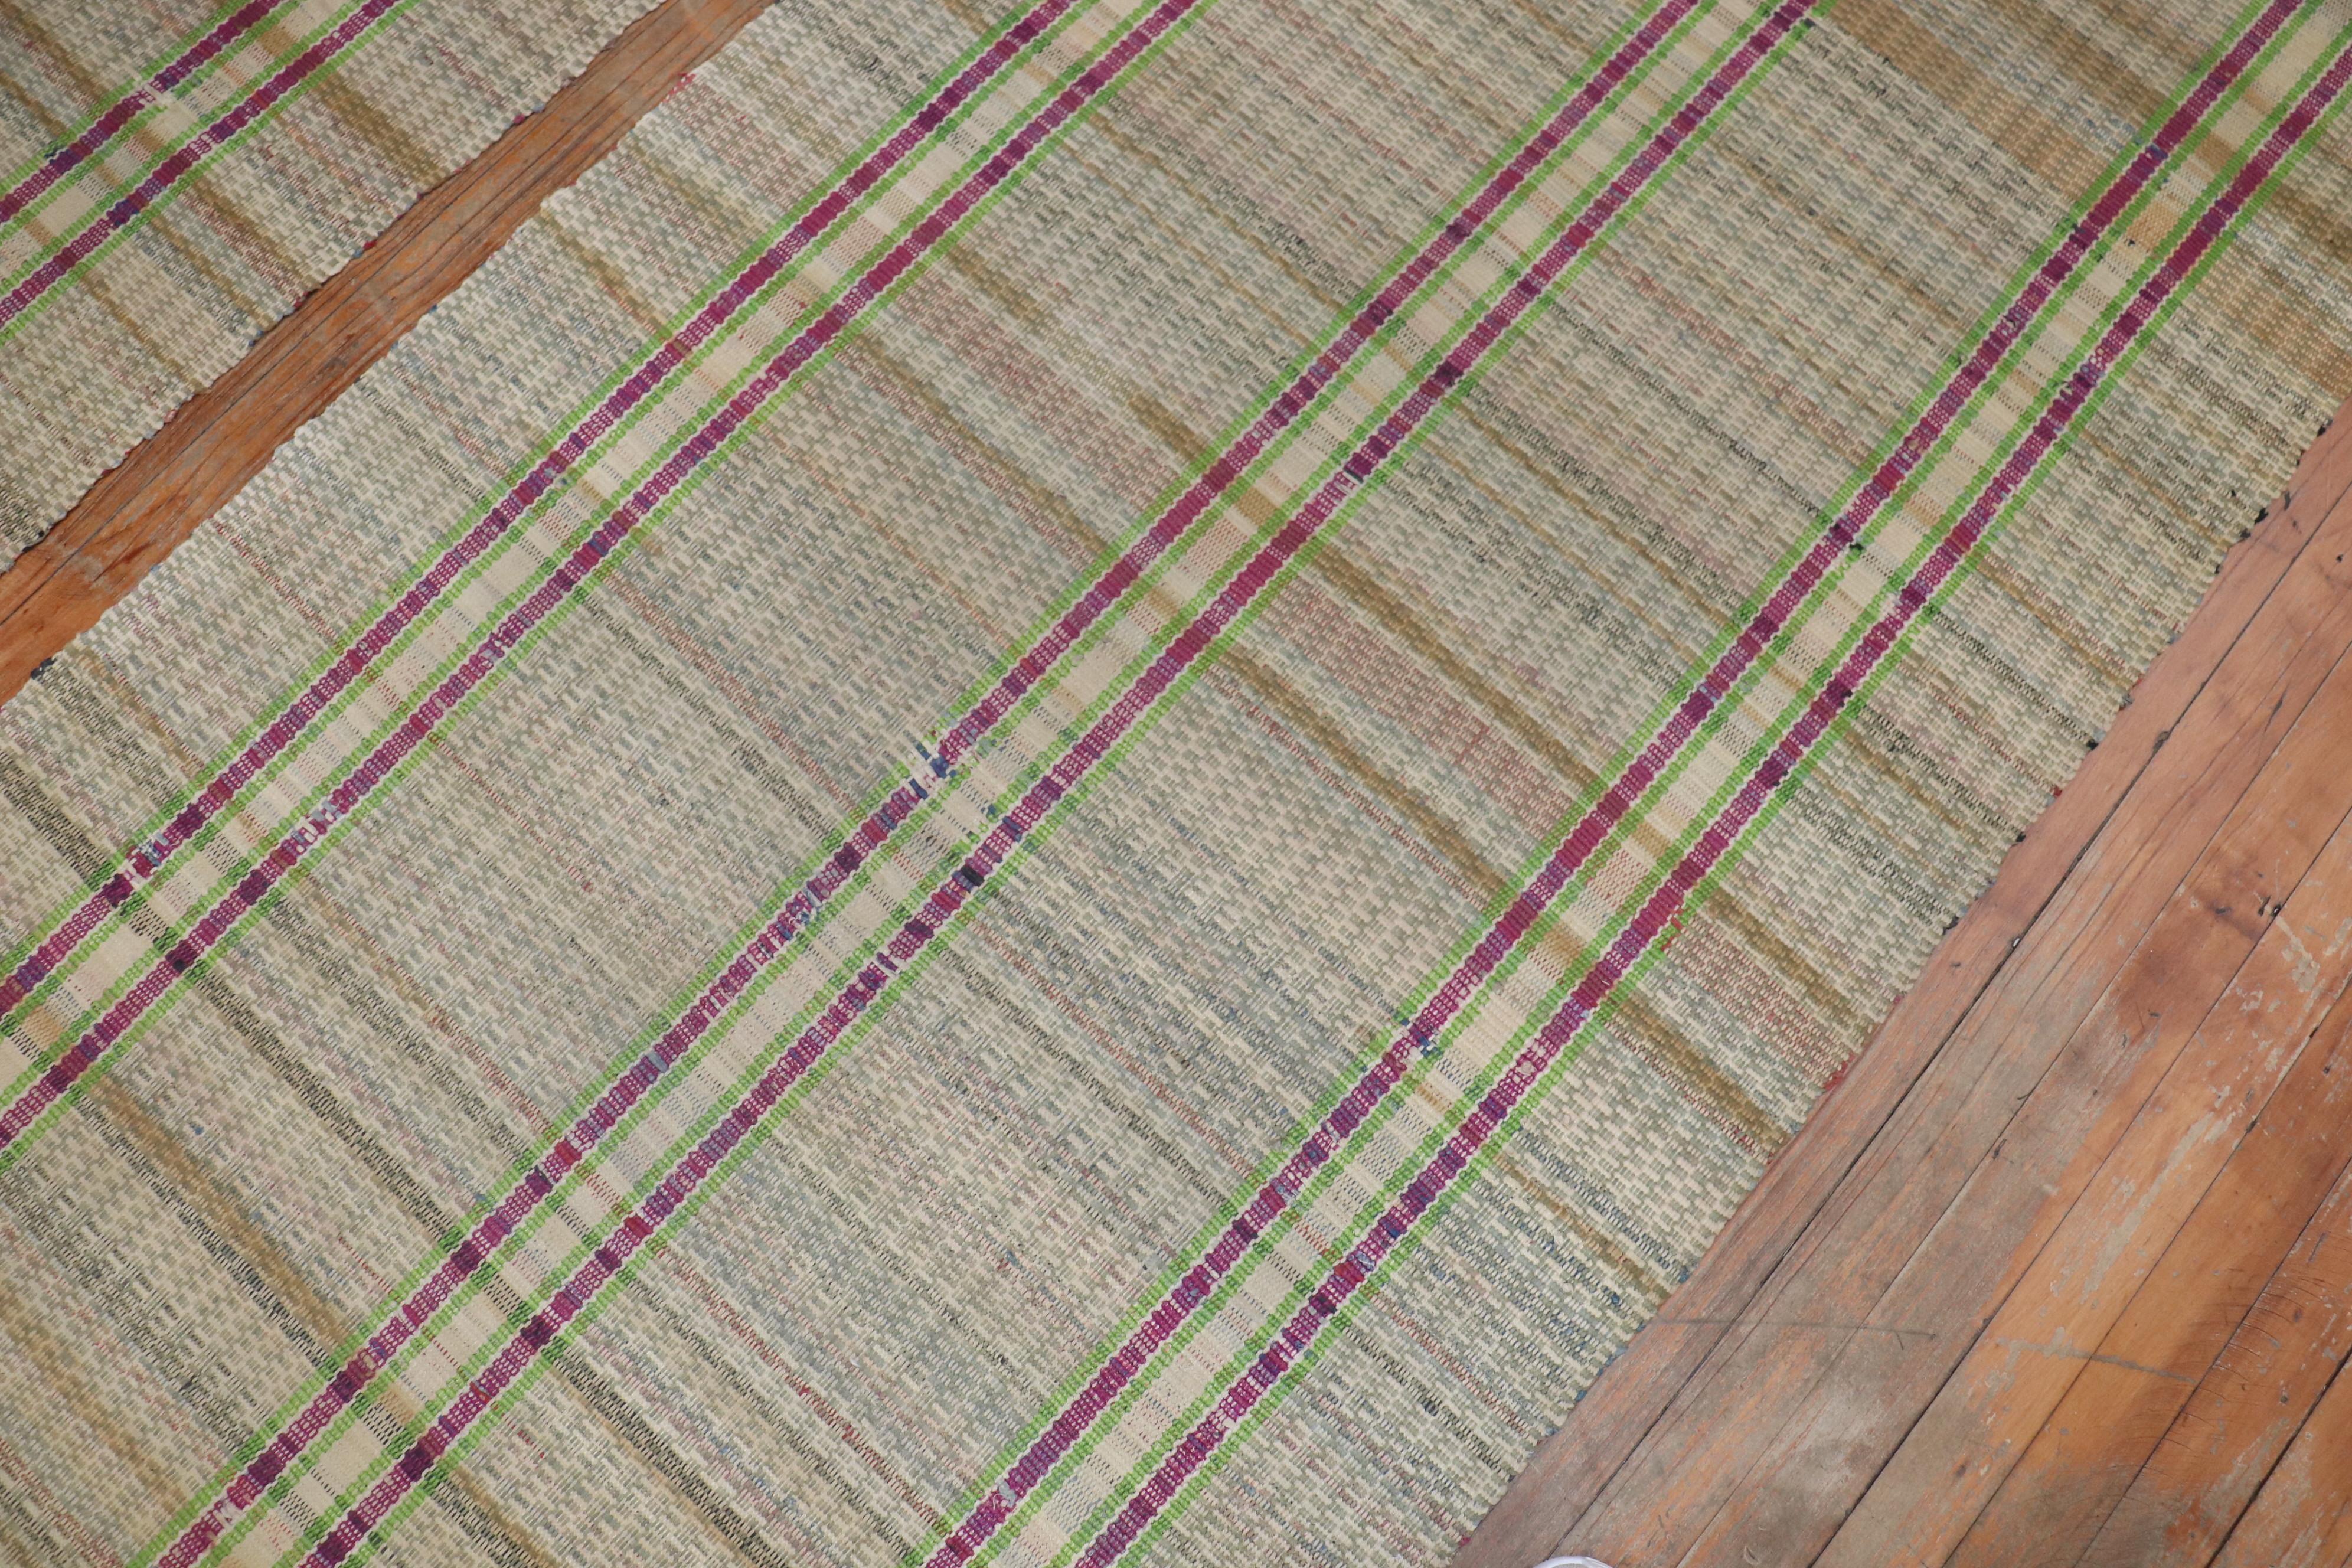 American Classical Plaid American Rag Rug Runners, Set of 2, Mid-20th Century For Sale